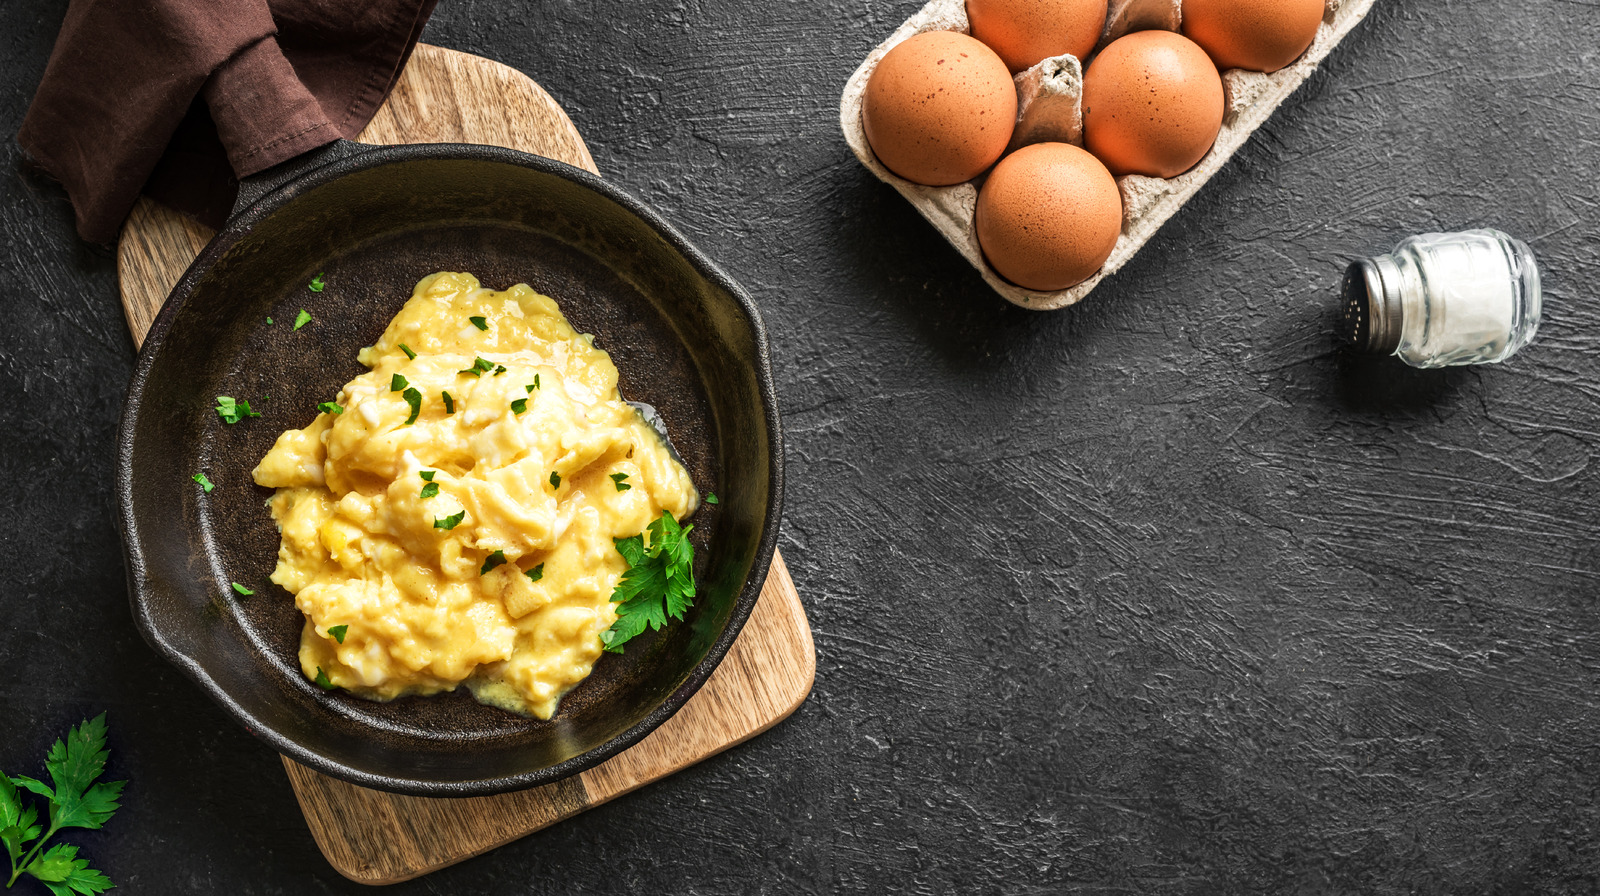 https://www.tastingtable.com/img/gallery/x-kitchen-tools-that-will-help-you-make-the-perfect-scrambled-eggs/l-intro-1685039009.jpg